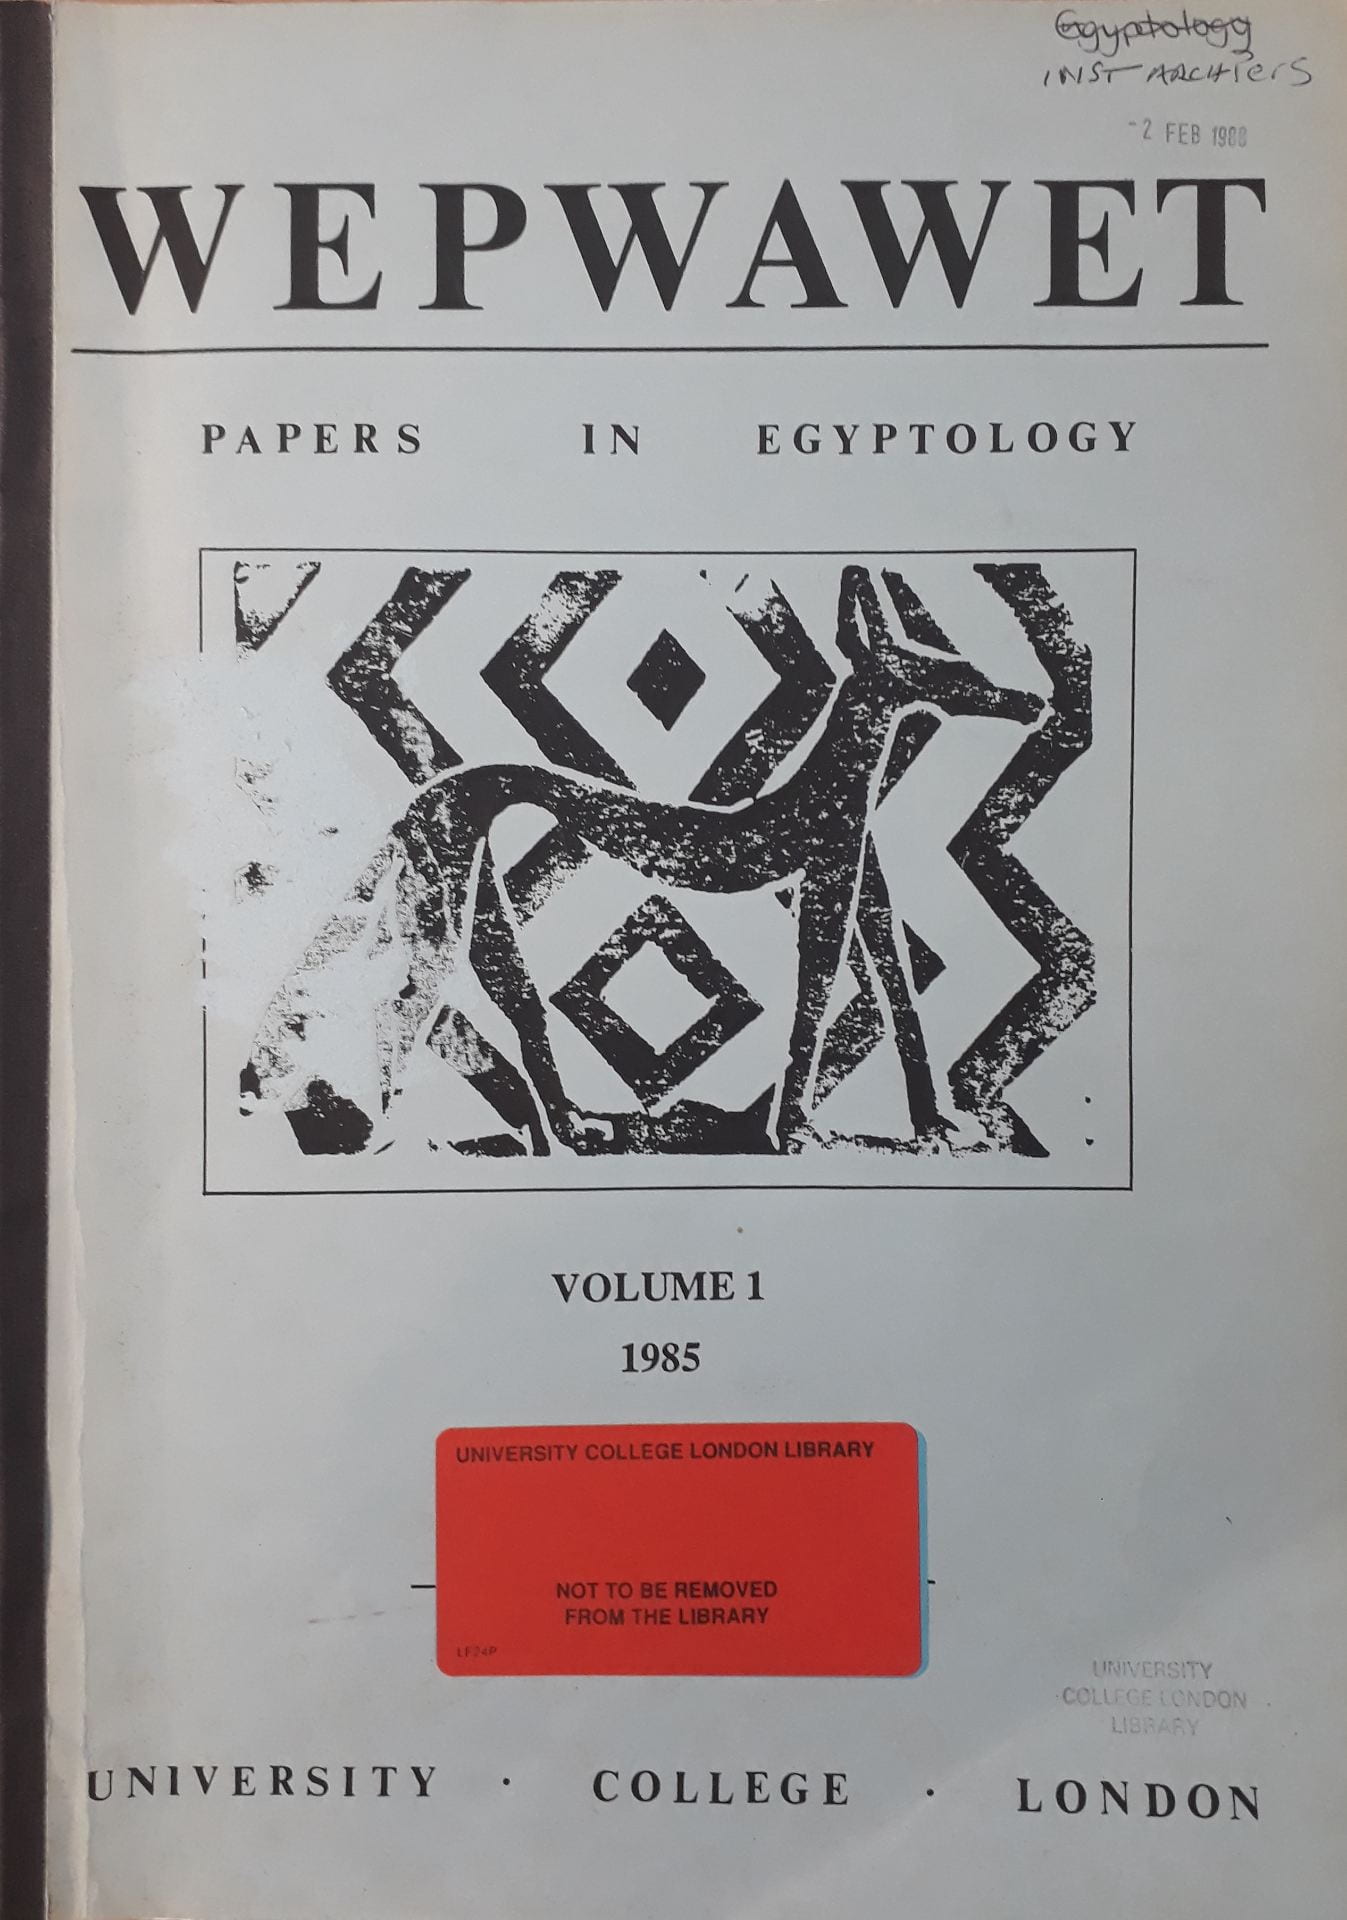 Front cover of the UCL journal 'Wepwawet', showing the title, an image of Wepwawet depicted as a wolf, and the details: 'Volume 1, 1985, University College London). Red sticker at the bottom saying' 'not to be removed from the Library'.